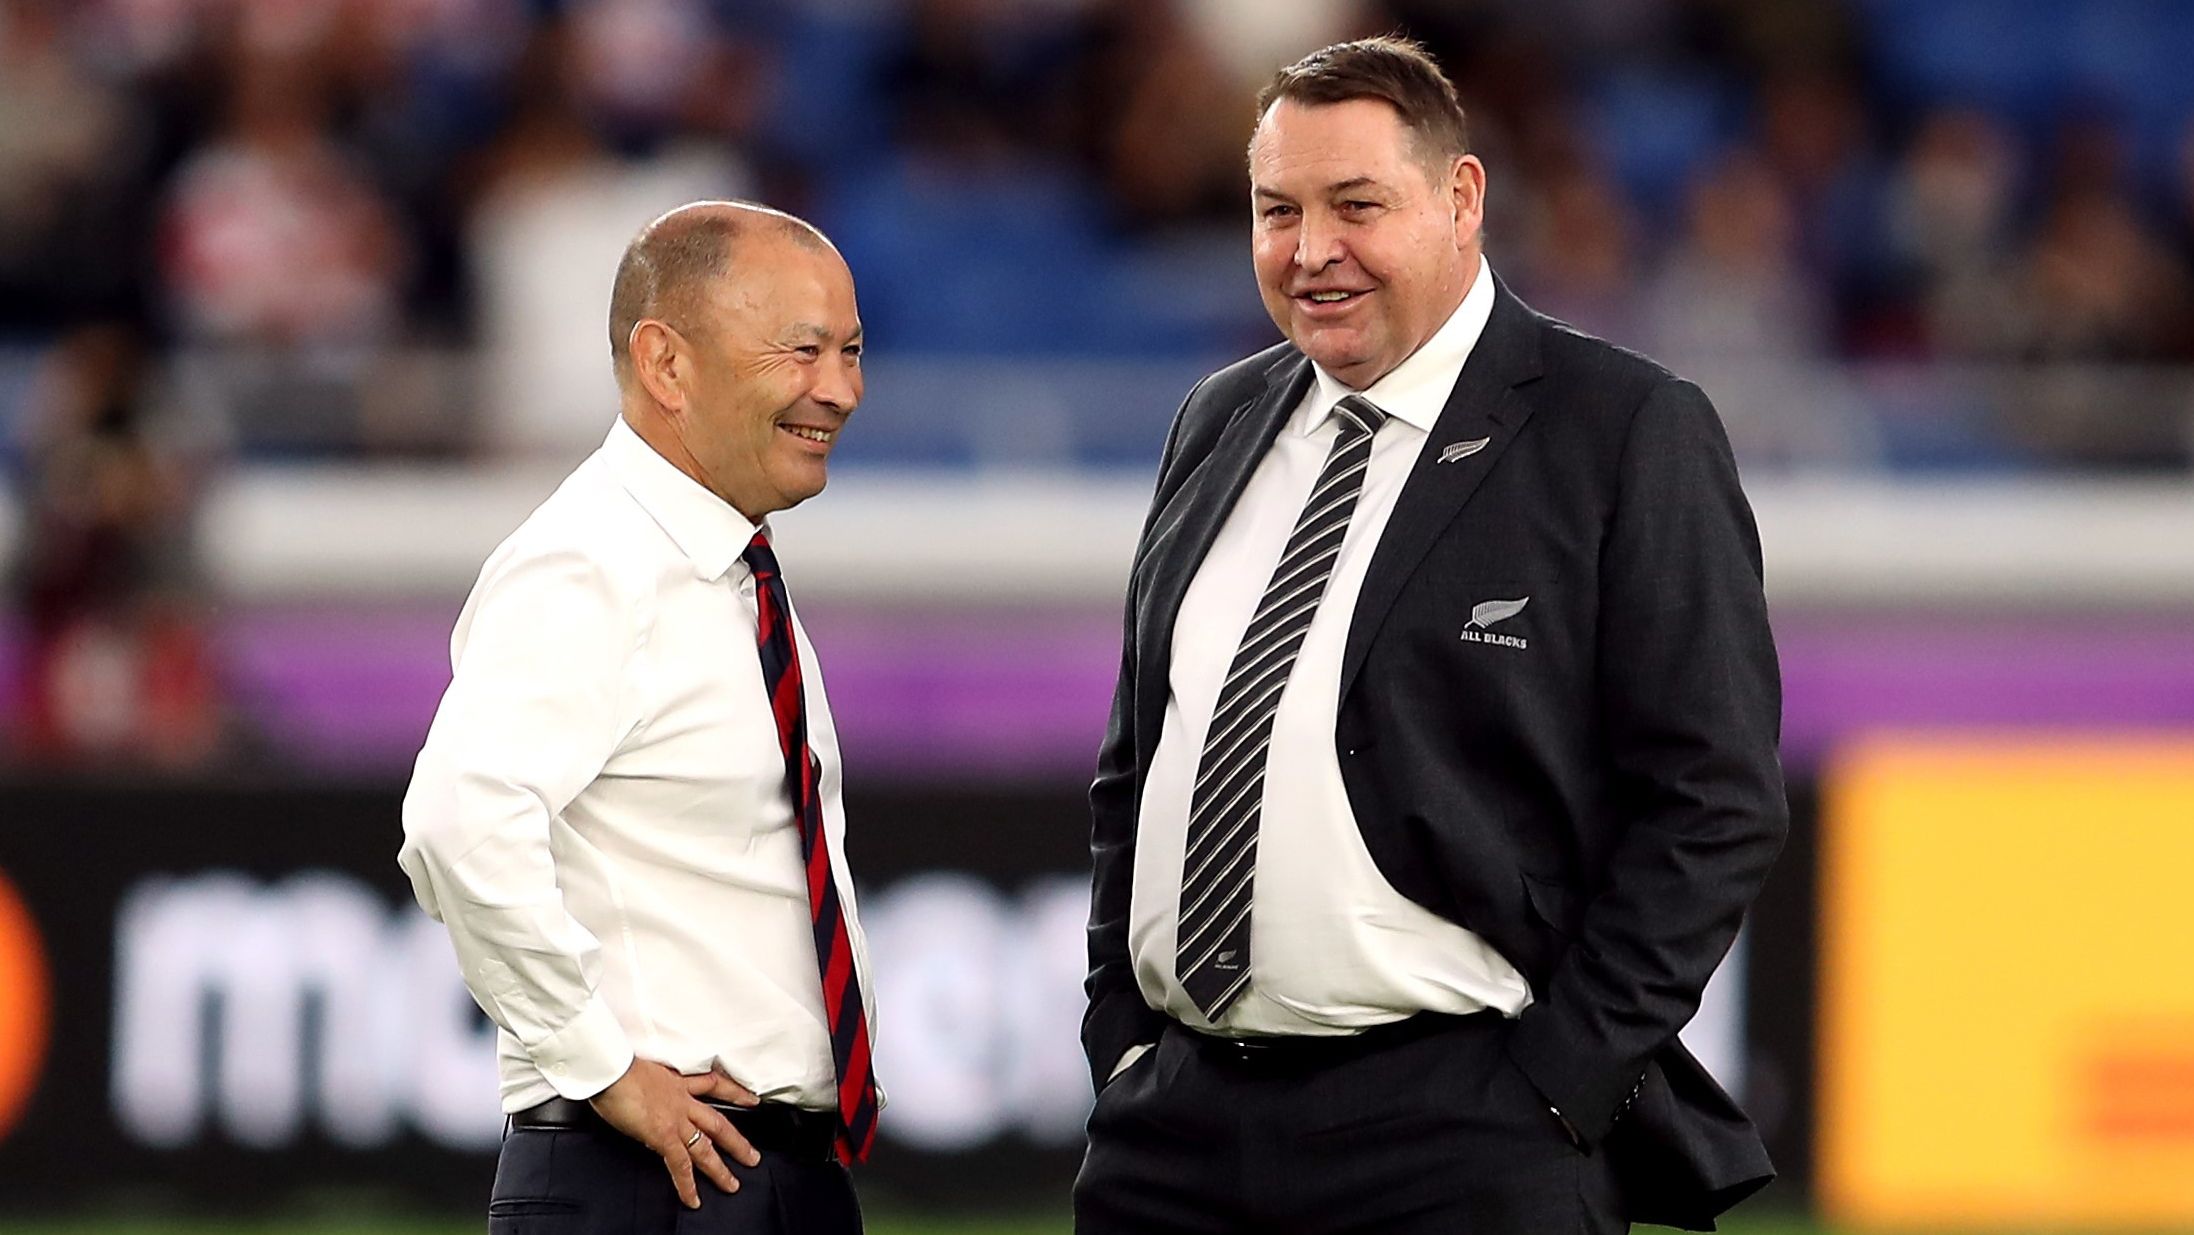 Then-England coach Eddie Jones (left) and New Zealand coach Steve Hansen at the 2019 Rugby World Cup.